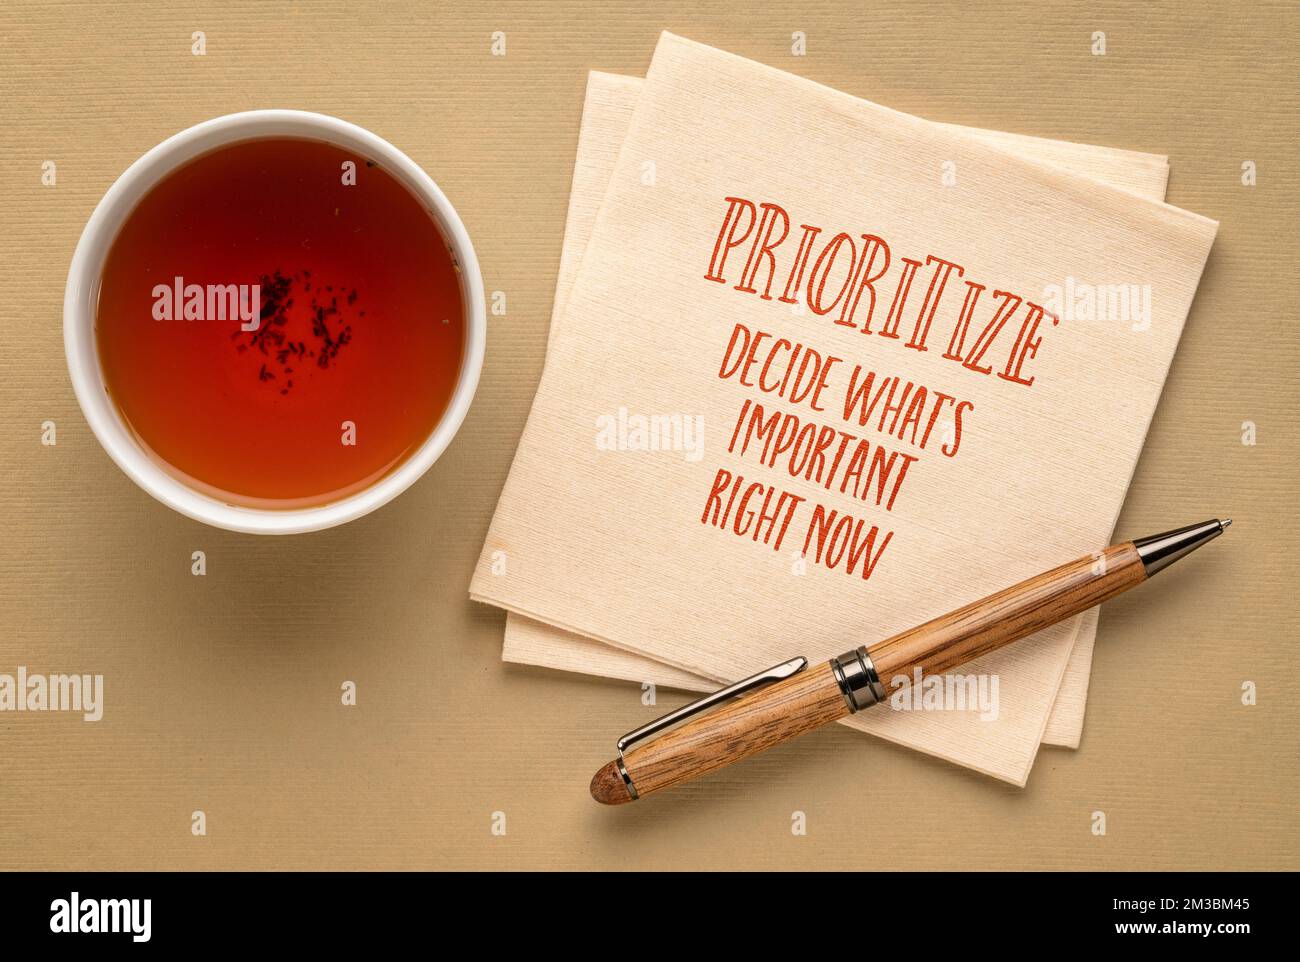 prioritize, decide what is important right now - inspirational advice or reminder on a napkin with a cup of tea, productivity and personal development Stock Photo